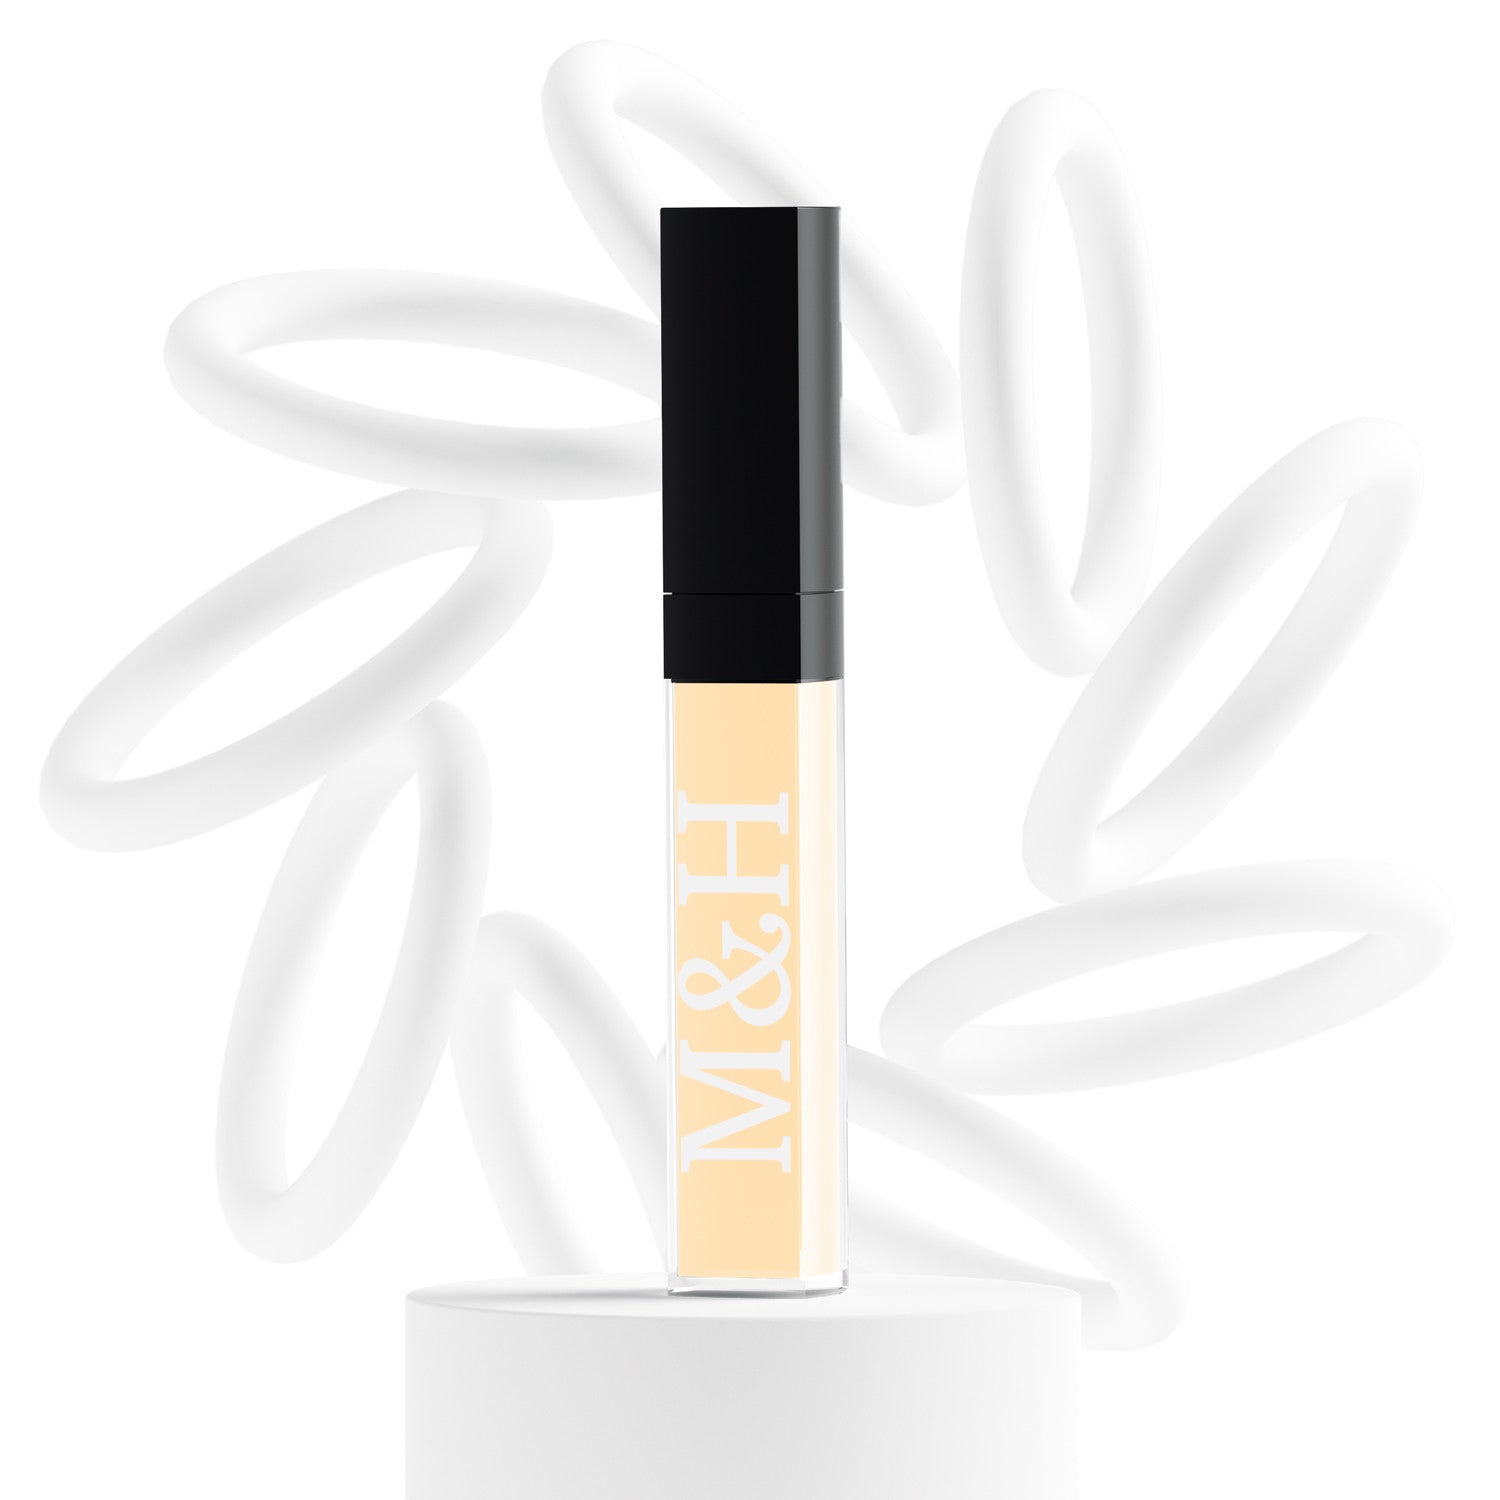 Cool-tone Concealers - M&H FashionCool-tone Concealersconcealer-coolM&H FashionM&H FashionConcealer-952Medium IvoryCool-tone ConcealersM&H Fashionconcealer-coolM&H Fashion This multifunctional concealer is designed to cover under-eye circles, complexion alterations, and major imperfections like scars, hyperpigmentation, burns, and tatCool-tone Concealers